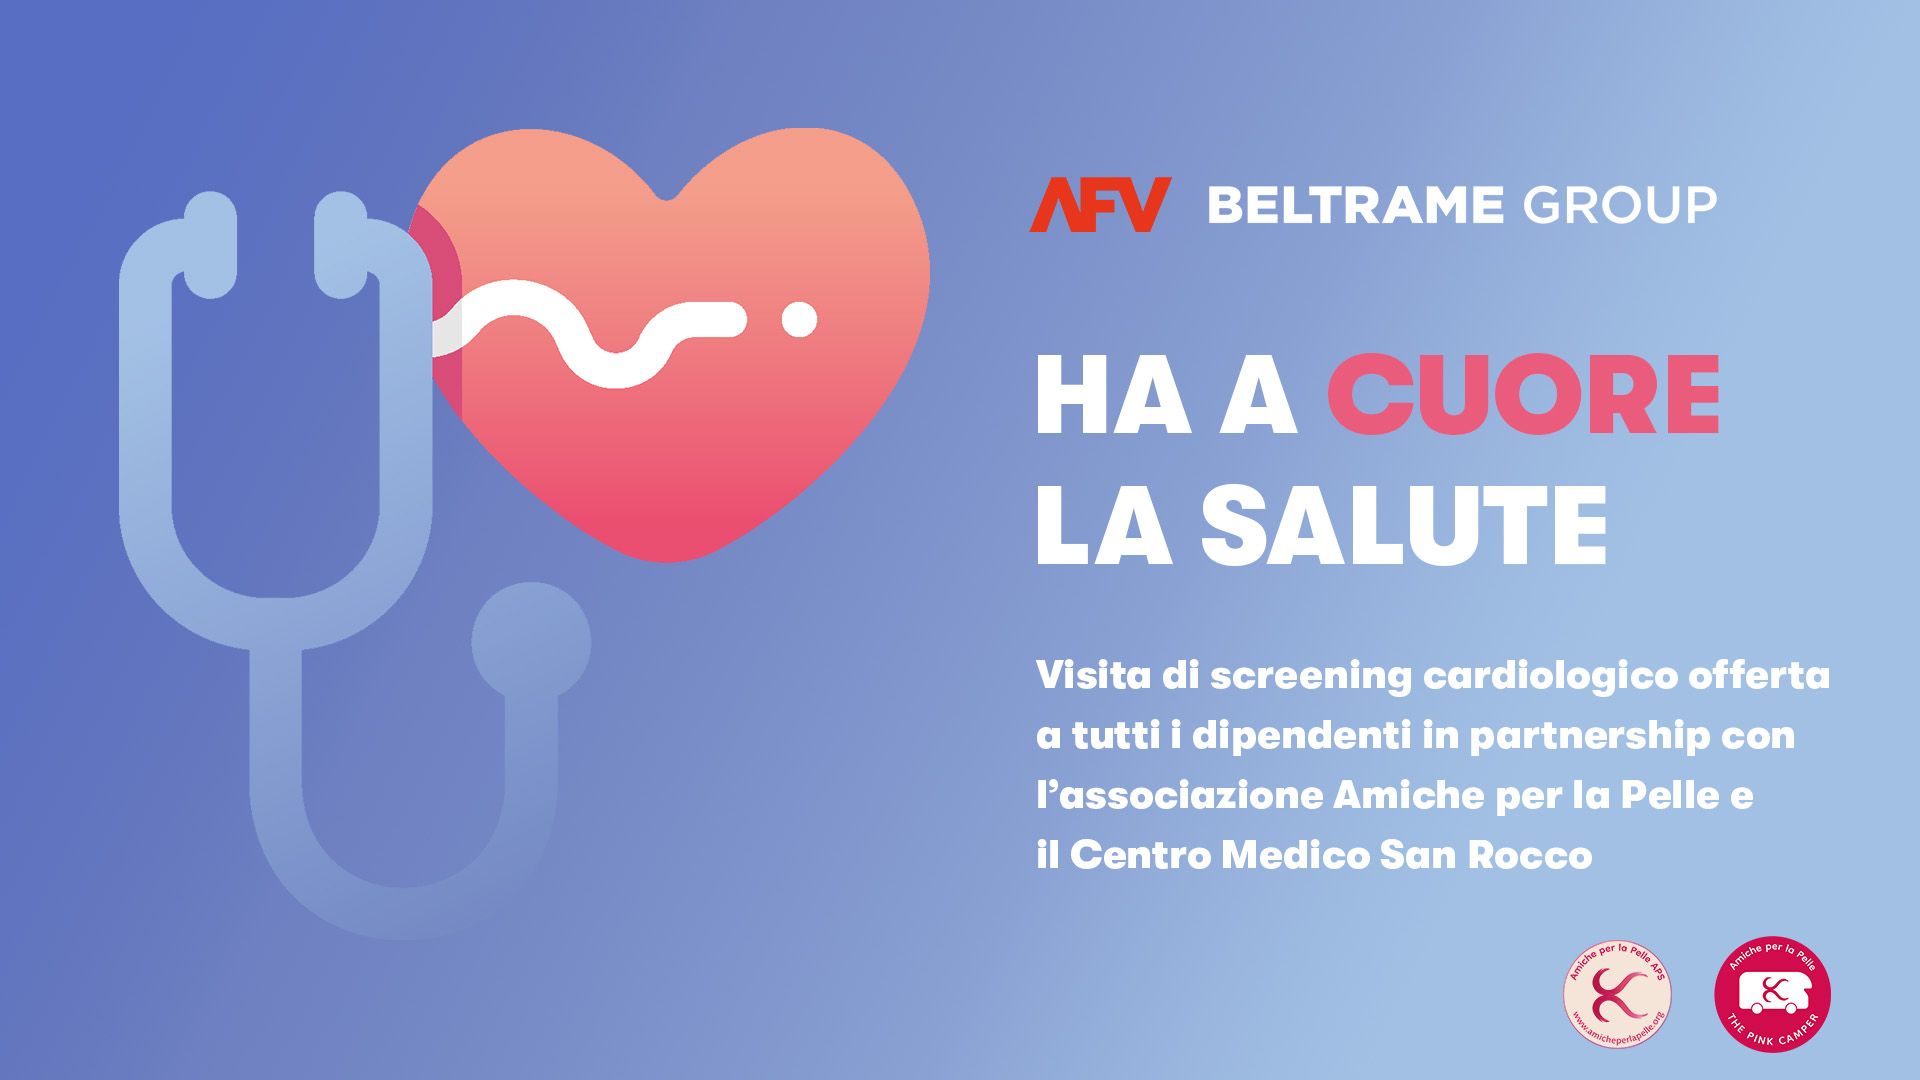 AFV Beltrame cares about health! New initiative for employees